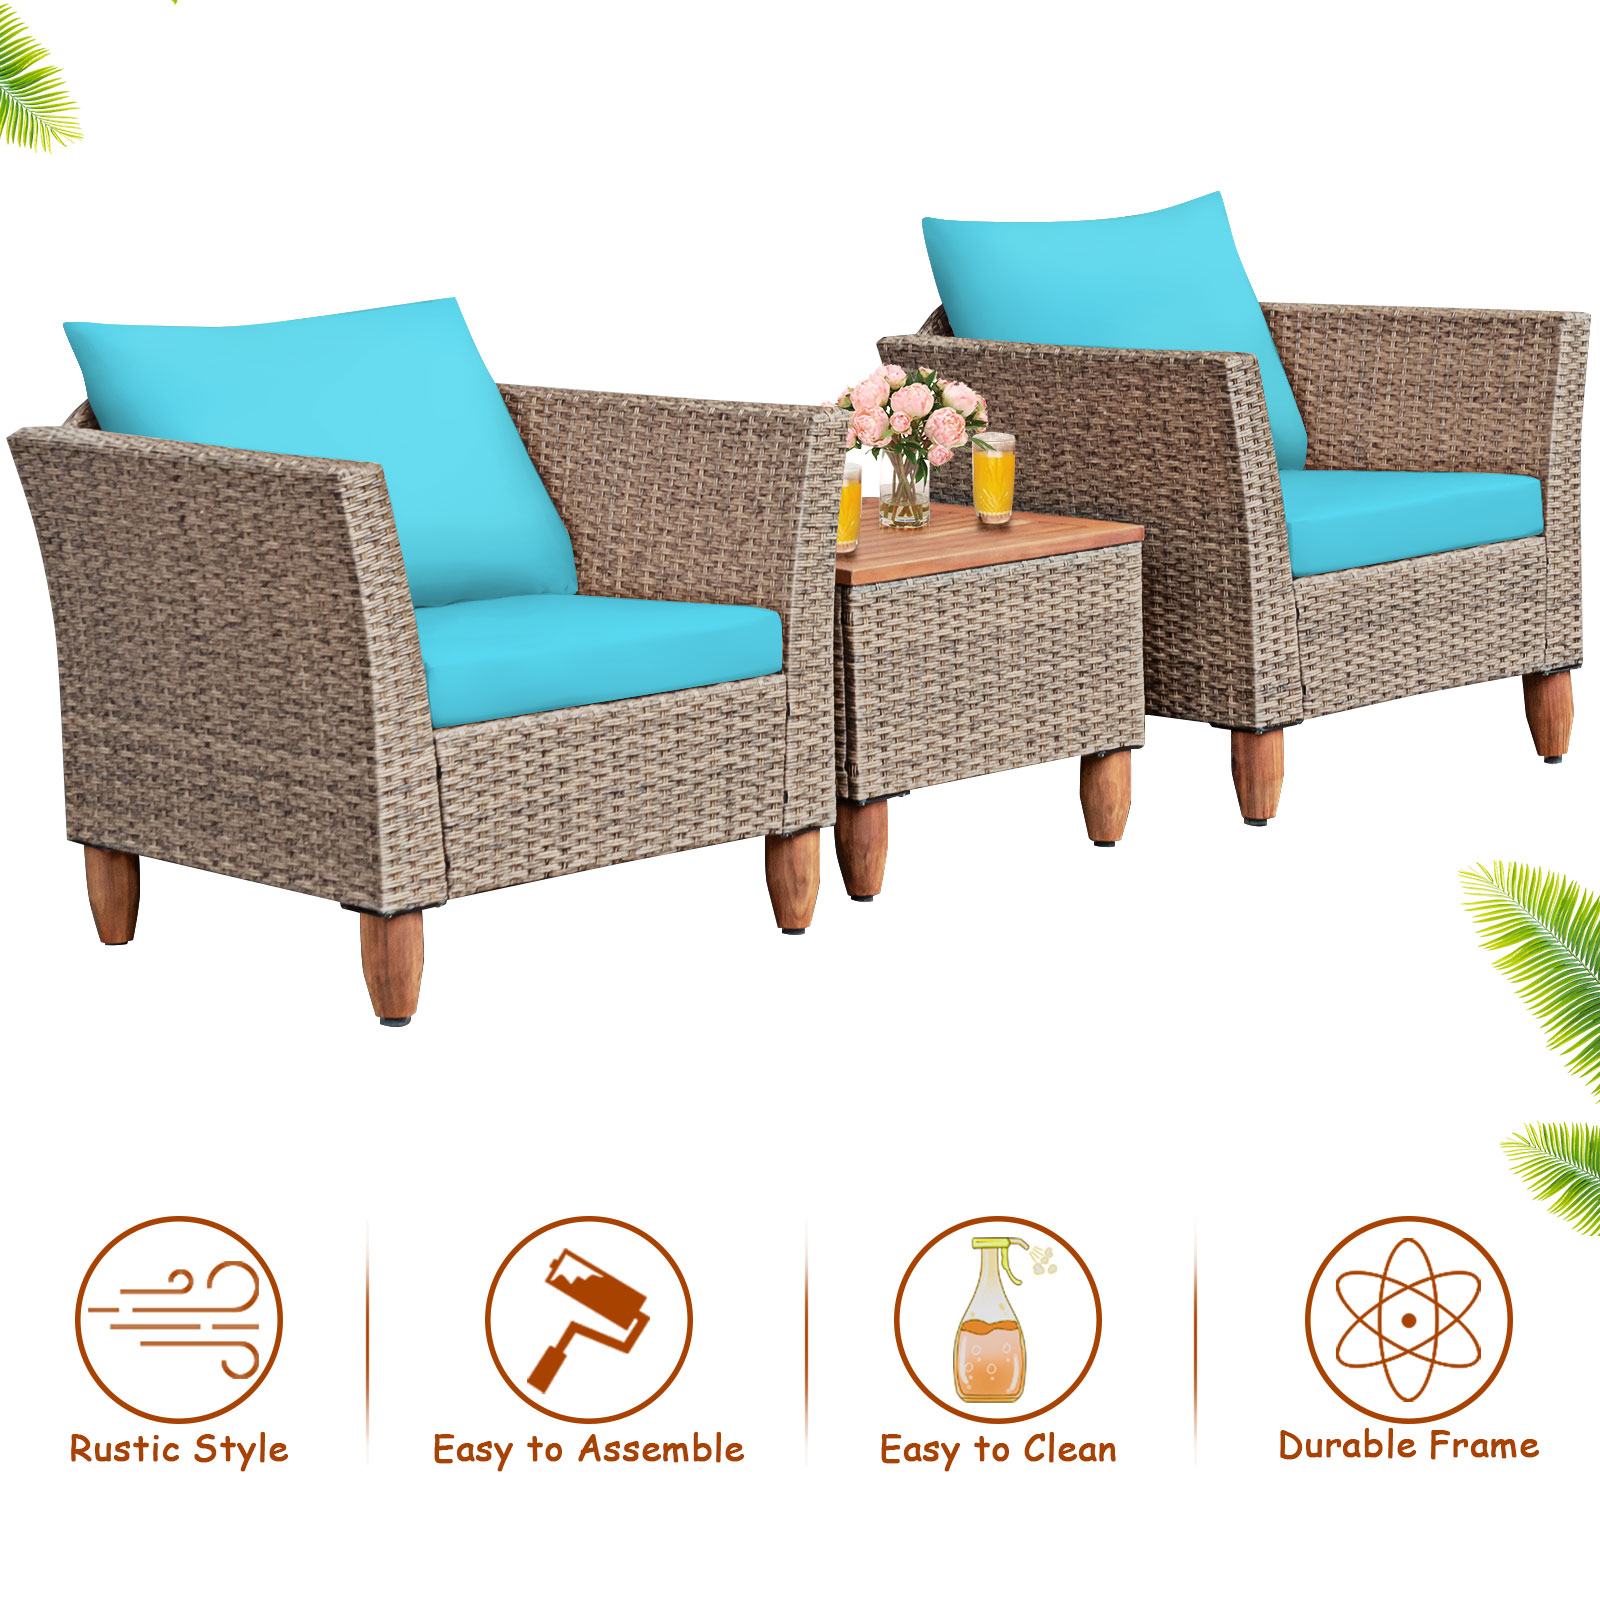 Patiojoy 3 Piece Outdoor Rattan Sofa Set Wicker Conversation Furniture Set with Turquoise Cushions - image 4 of 9